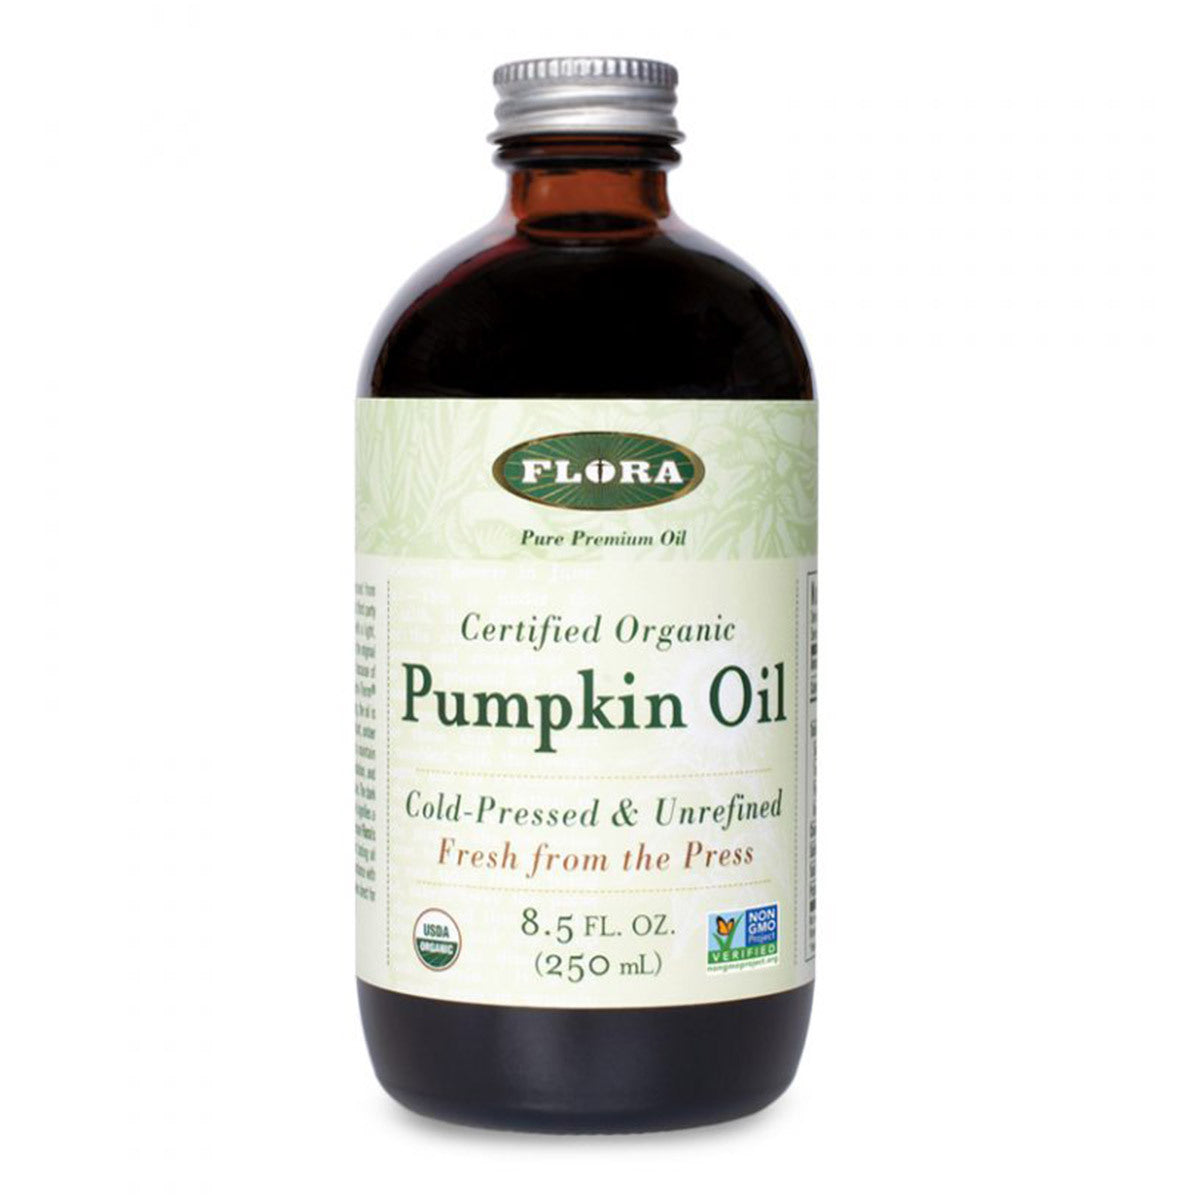 Primary image of Pumpkin Seed Oil